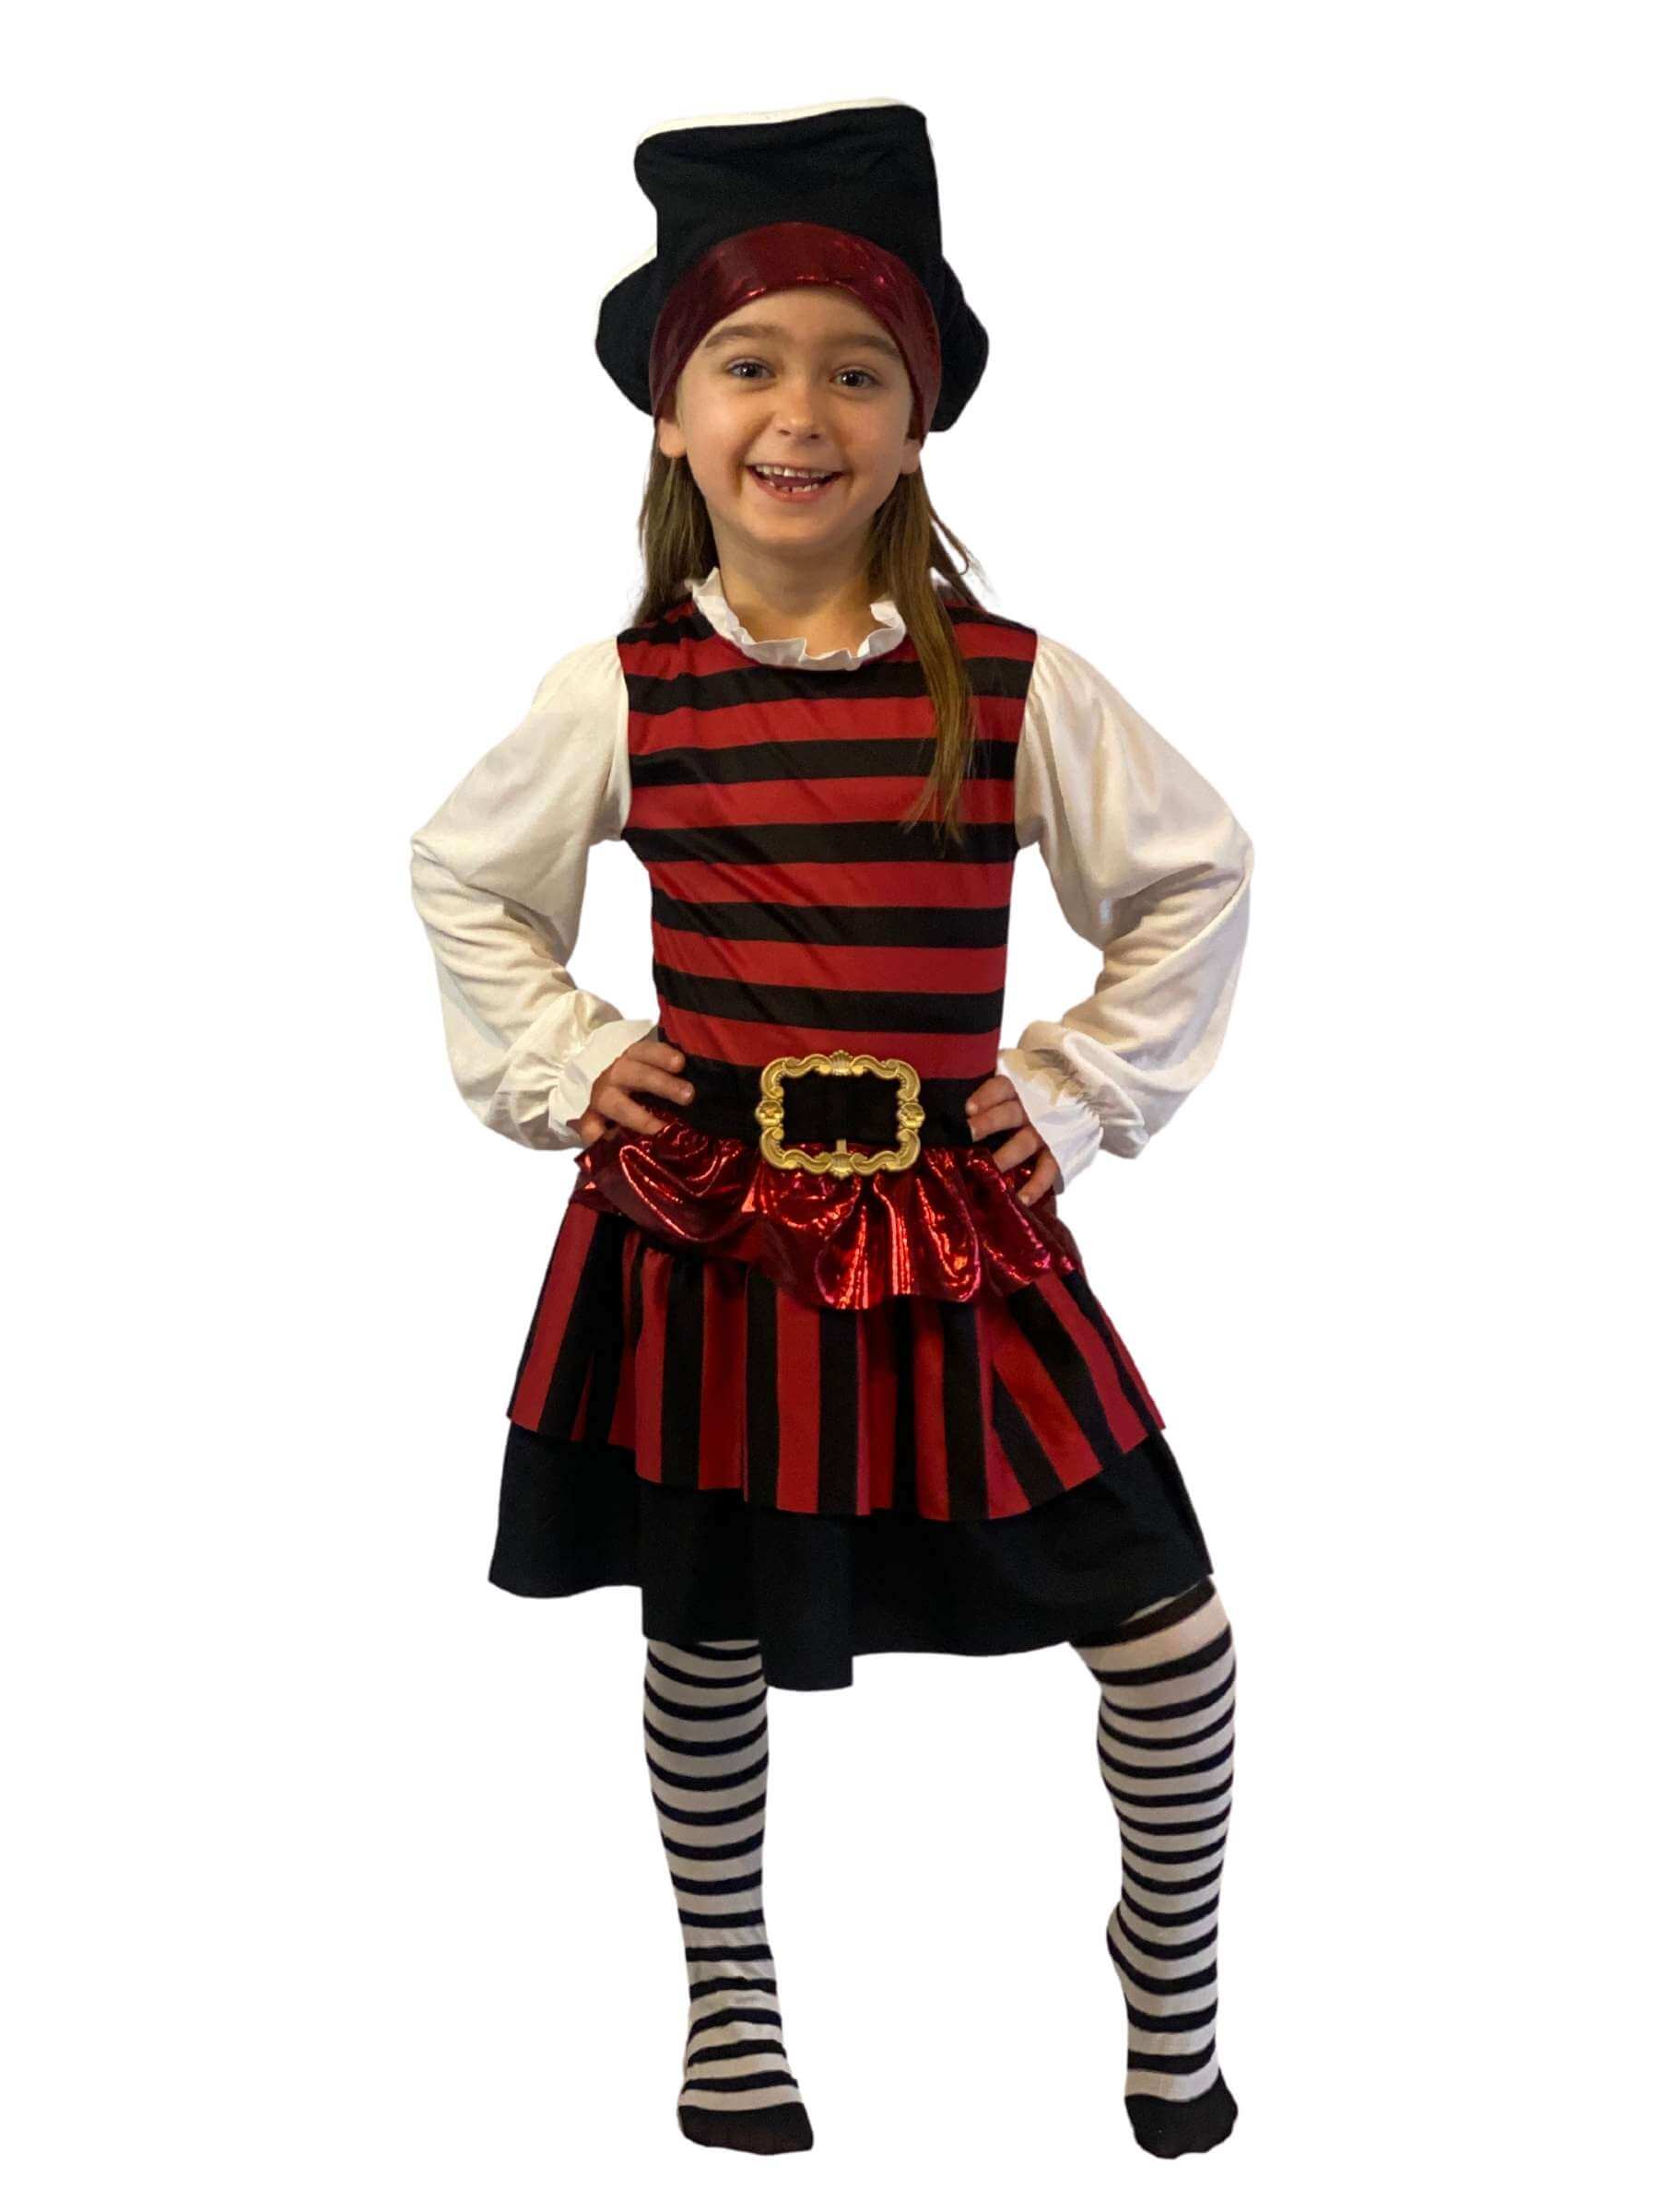 Girl wearing red and black horizontal striped dress with white sleeves and black and white striped tights,